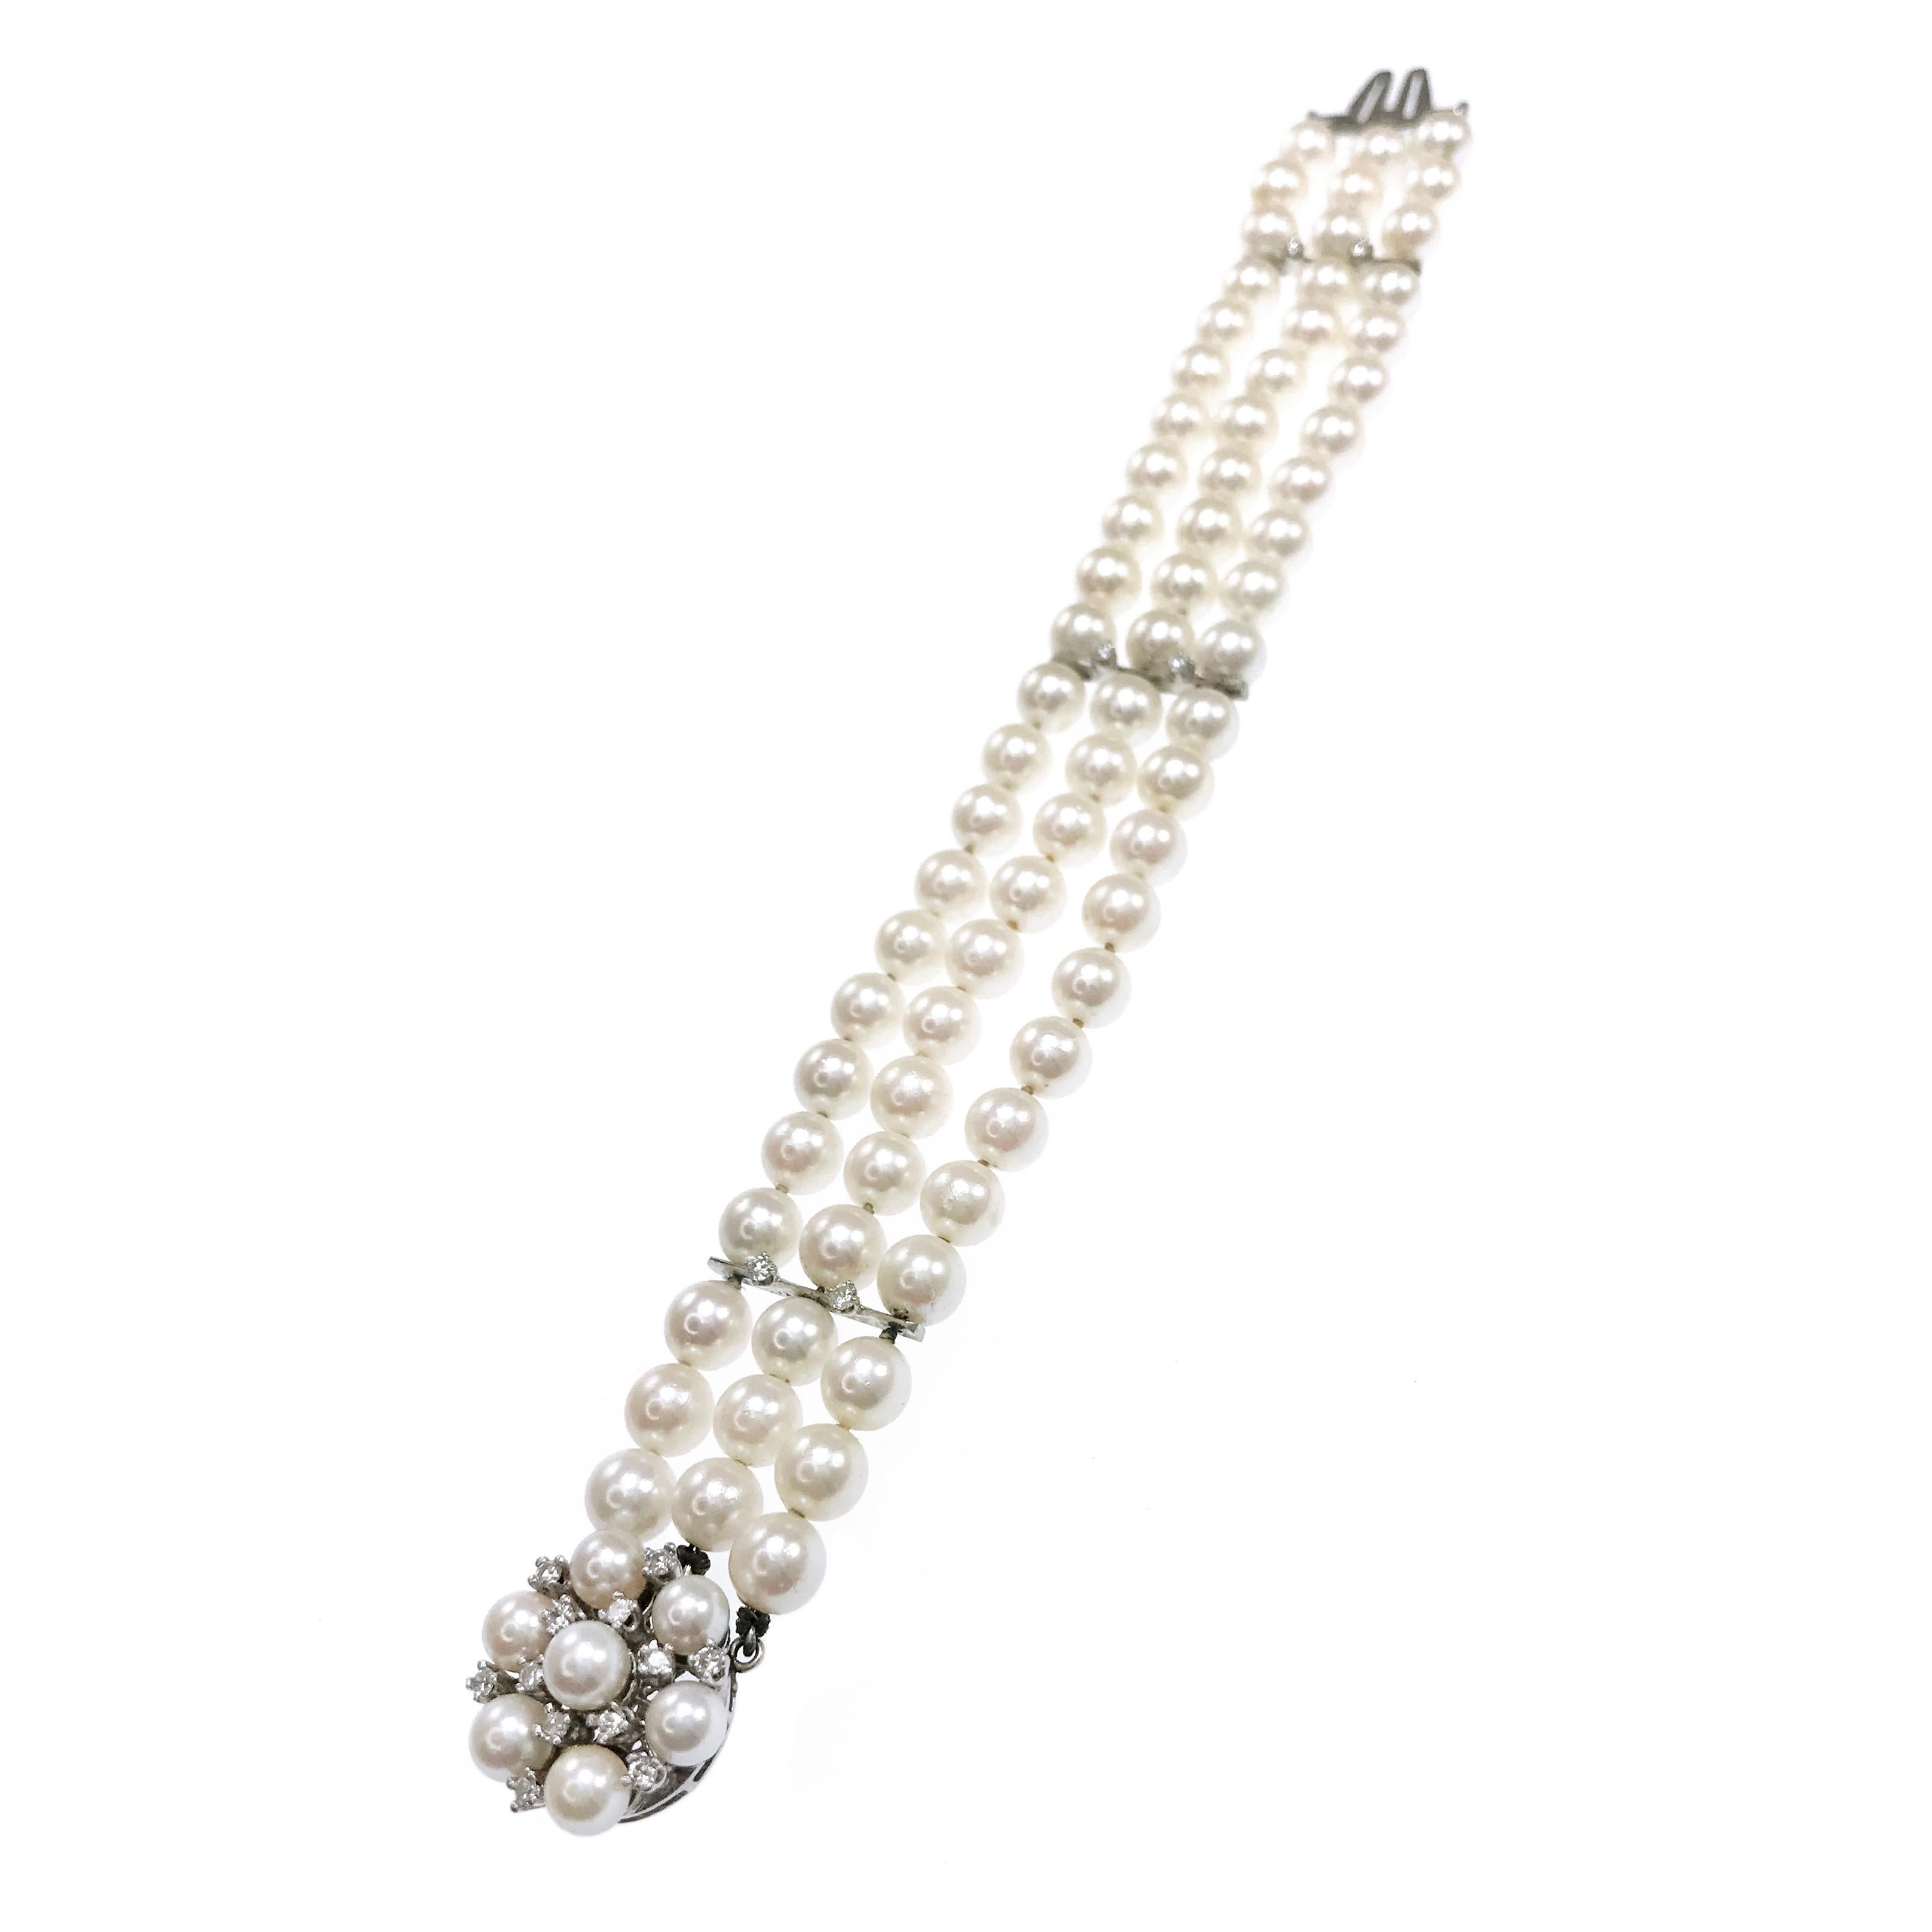 14 Karat Three-Row Pearl Diamond Bracelet. Delicate triple-row pearl bracelet with diamond accents. Seventy-six 6mm pearls and eighteen diamonds. This is a lovely piece, three thin bars with prong-set dainty diamonds in between a sea of pearls. The